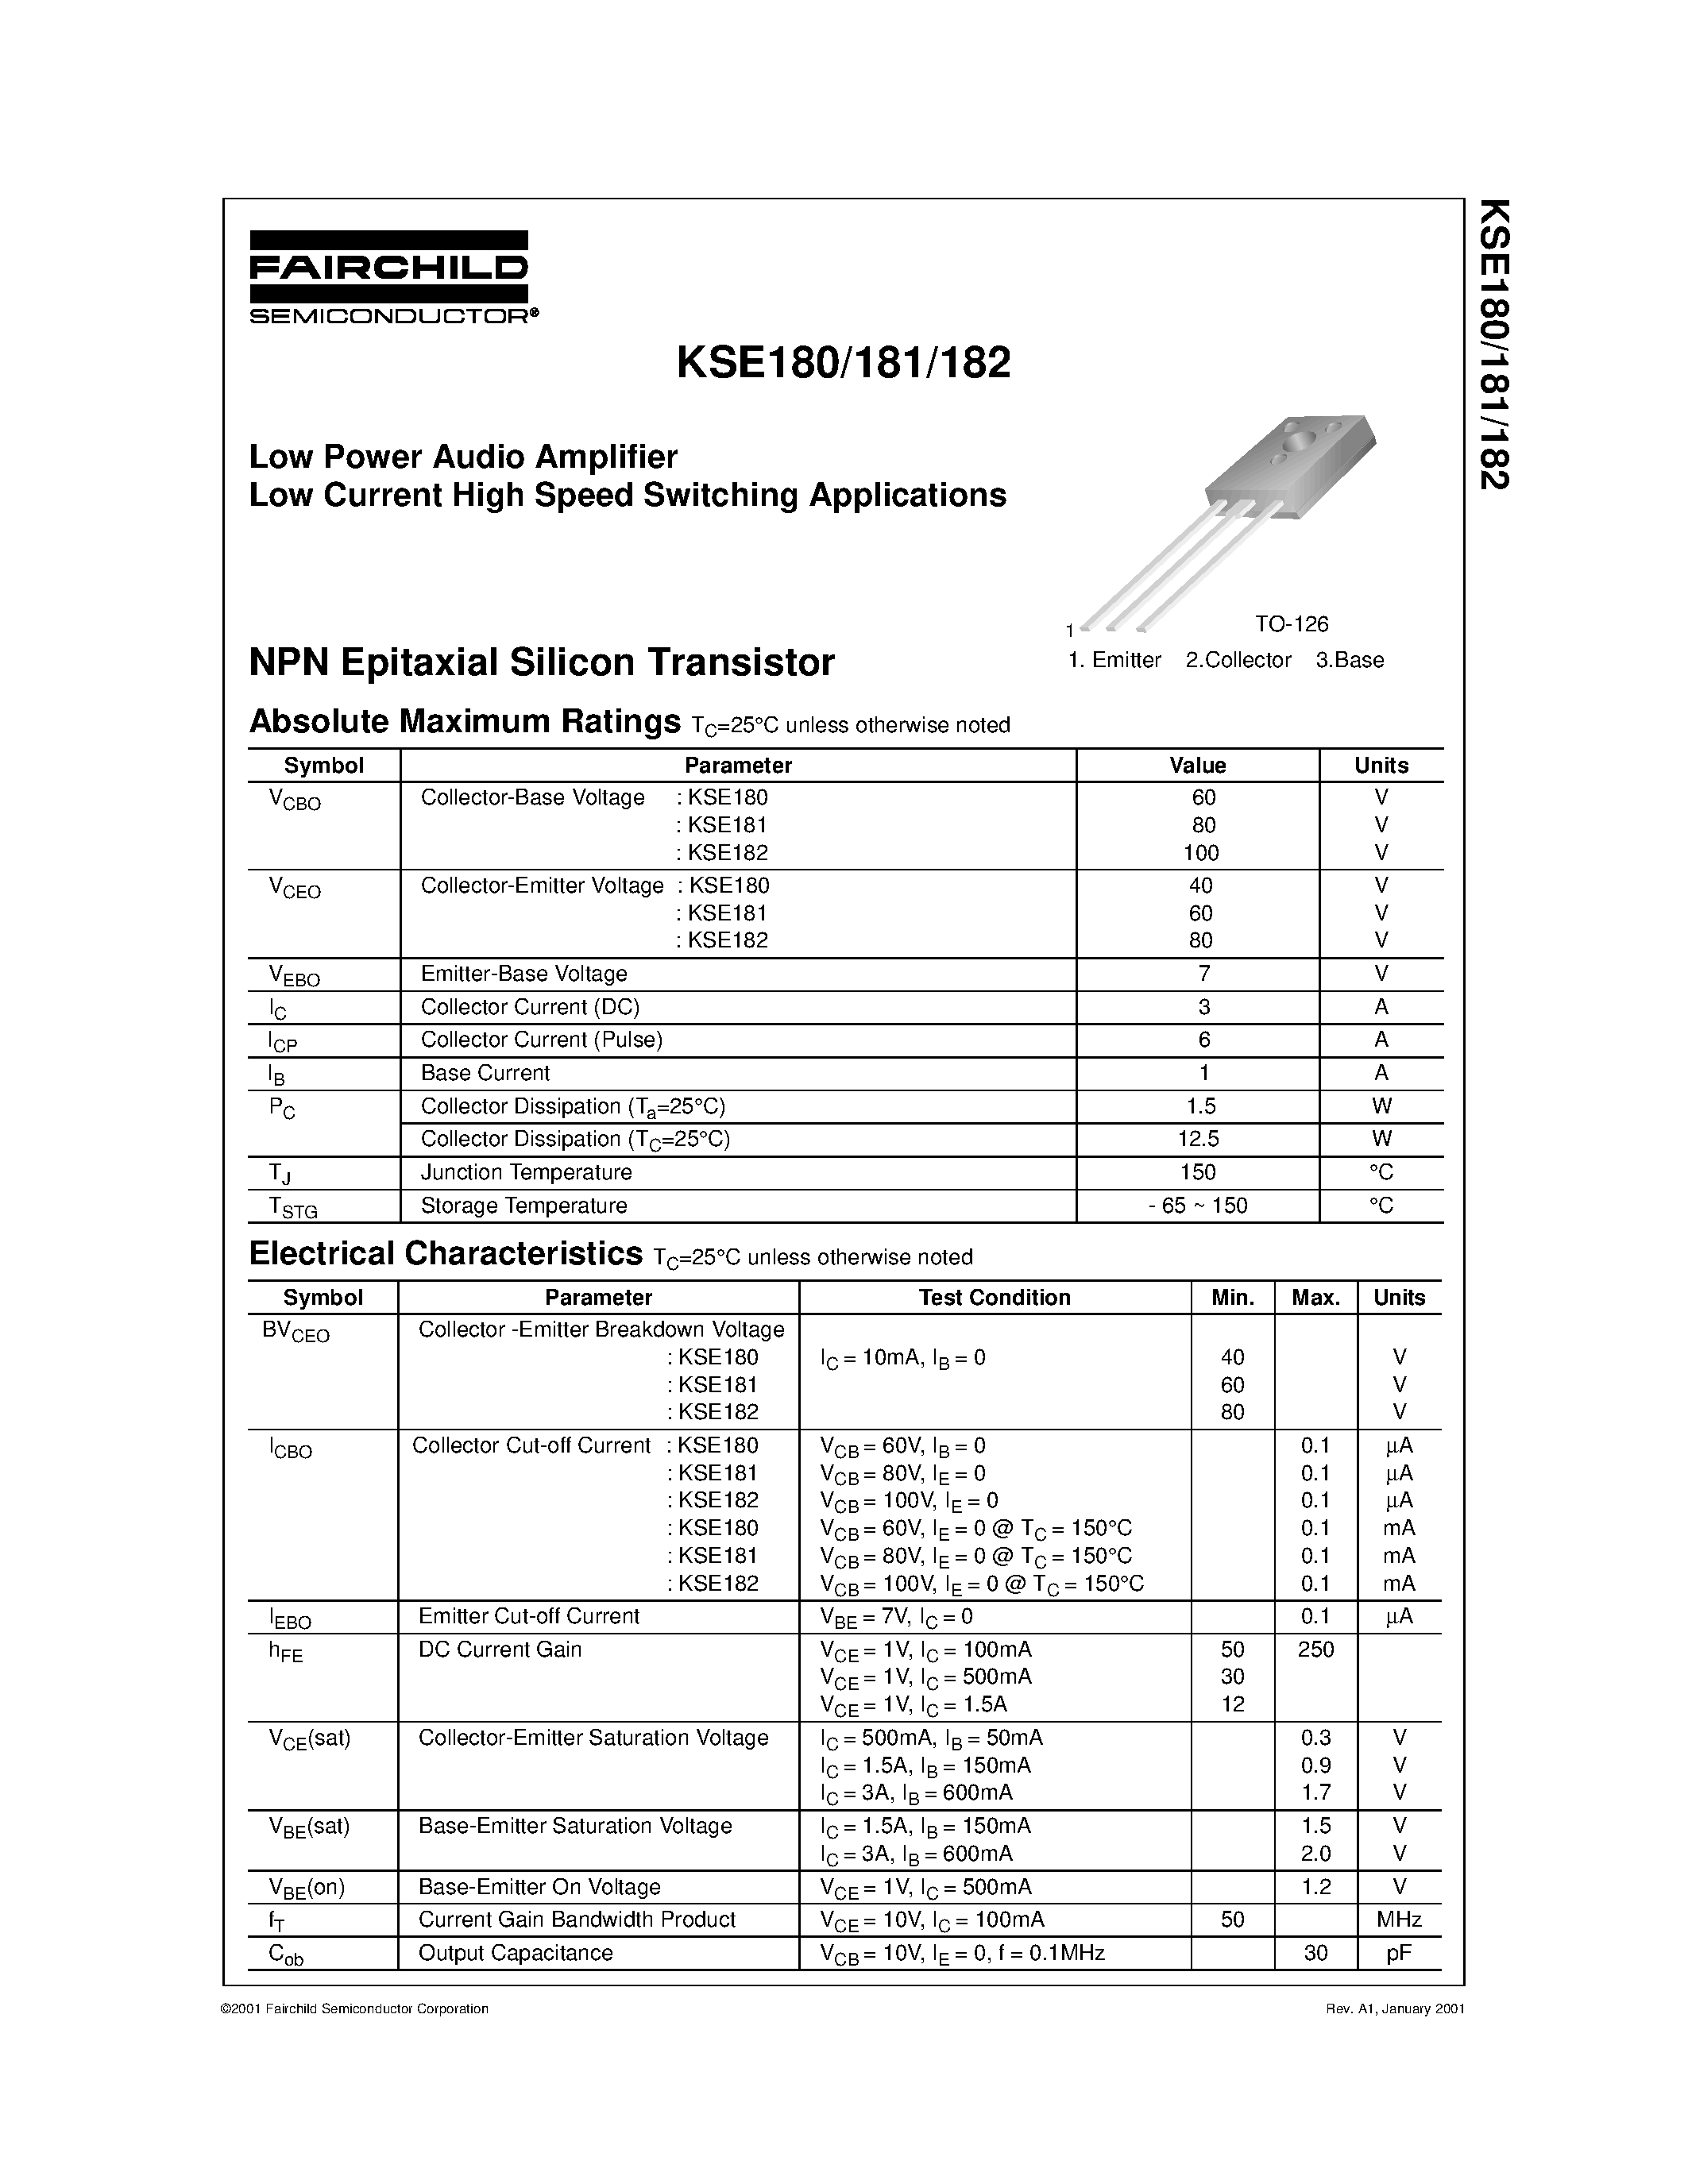 Datasheet KSE180 - Low Power Audio Amplifier Low Current High Speed Switching Applications page 1